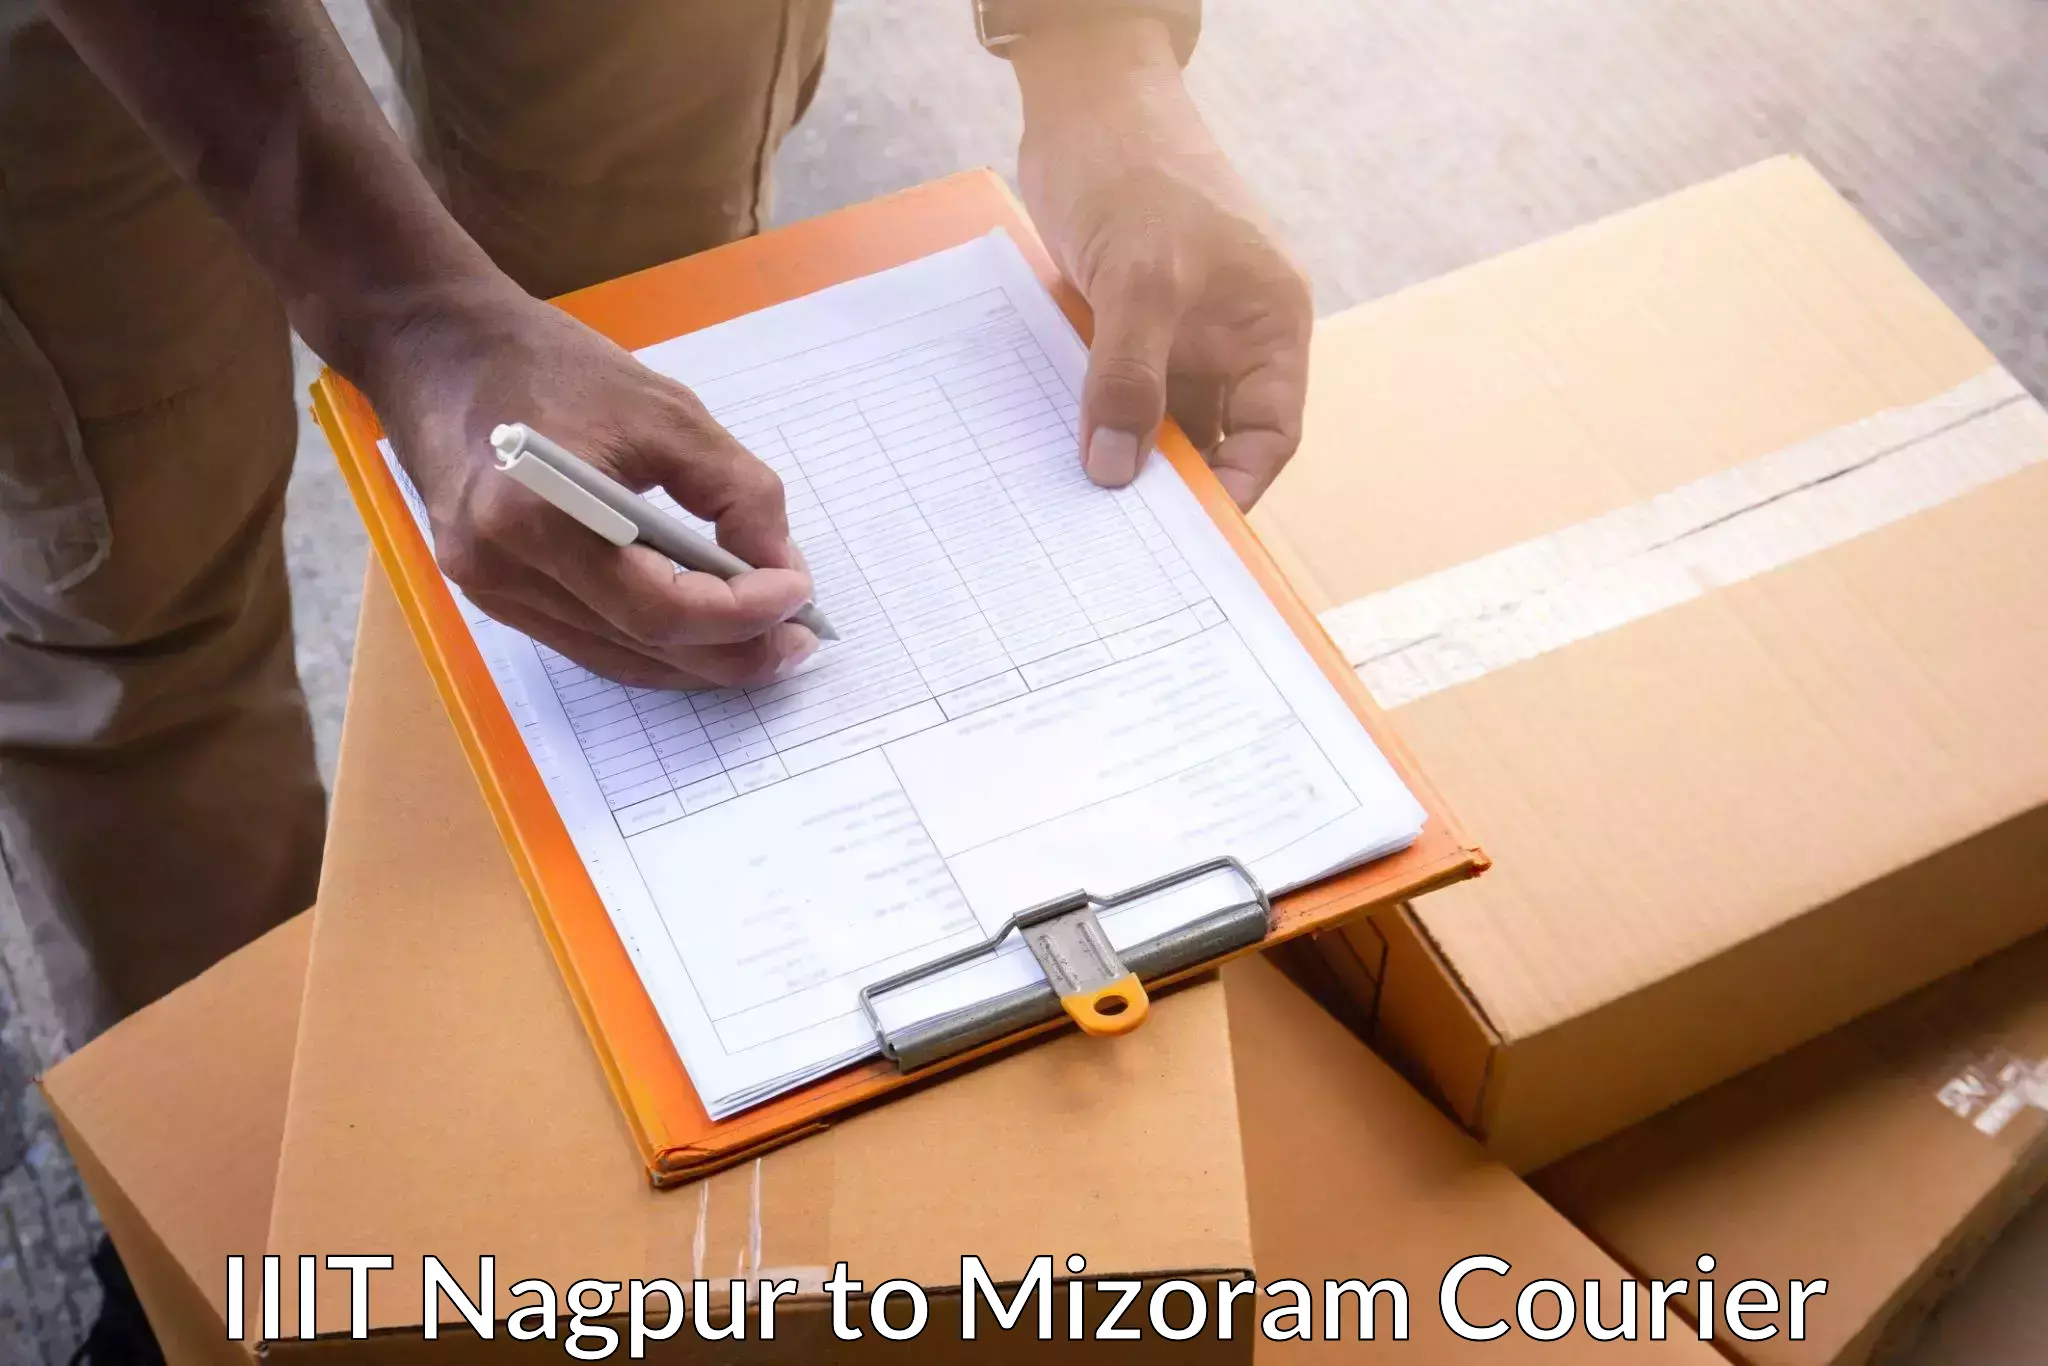 On-call courier service IIIT Nagpur to Siaha